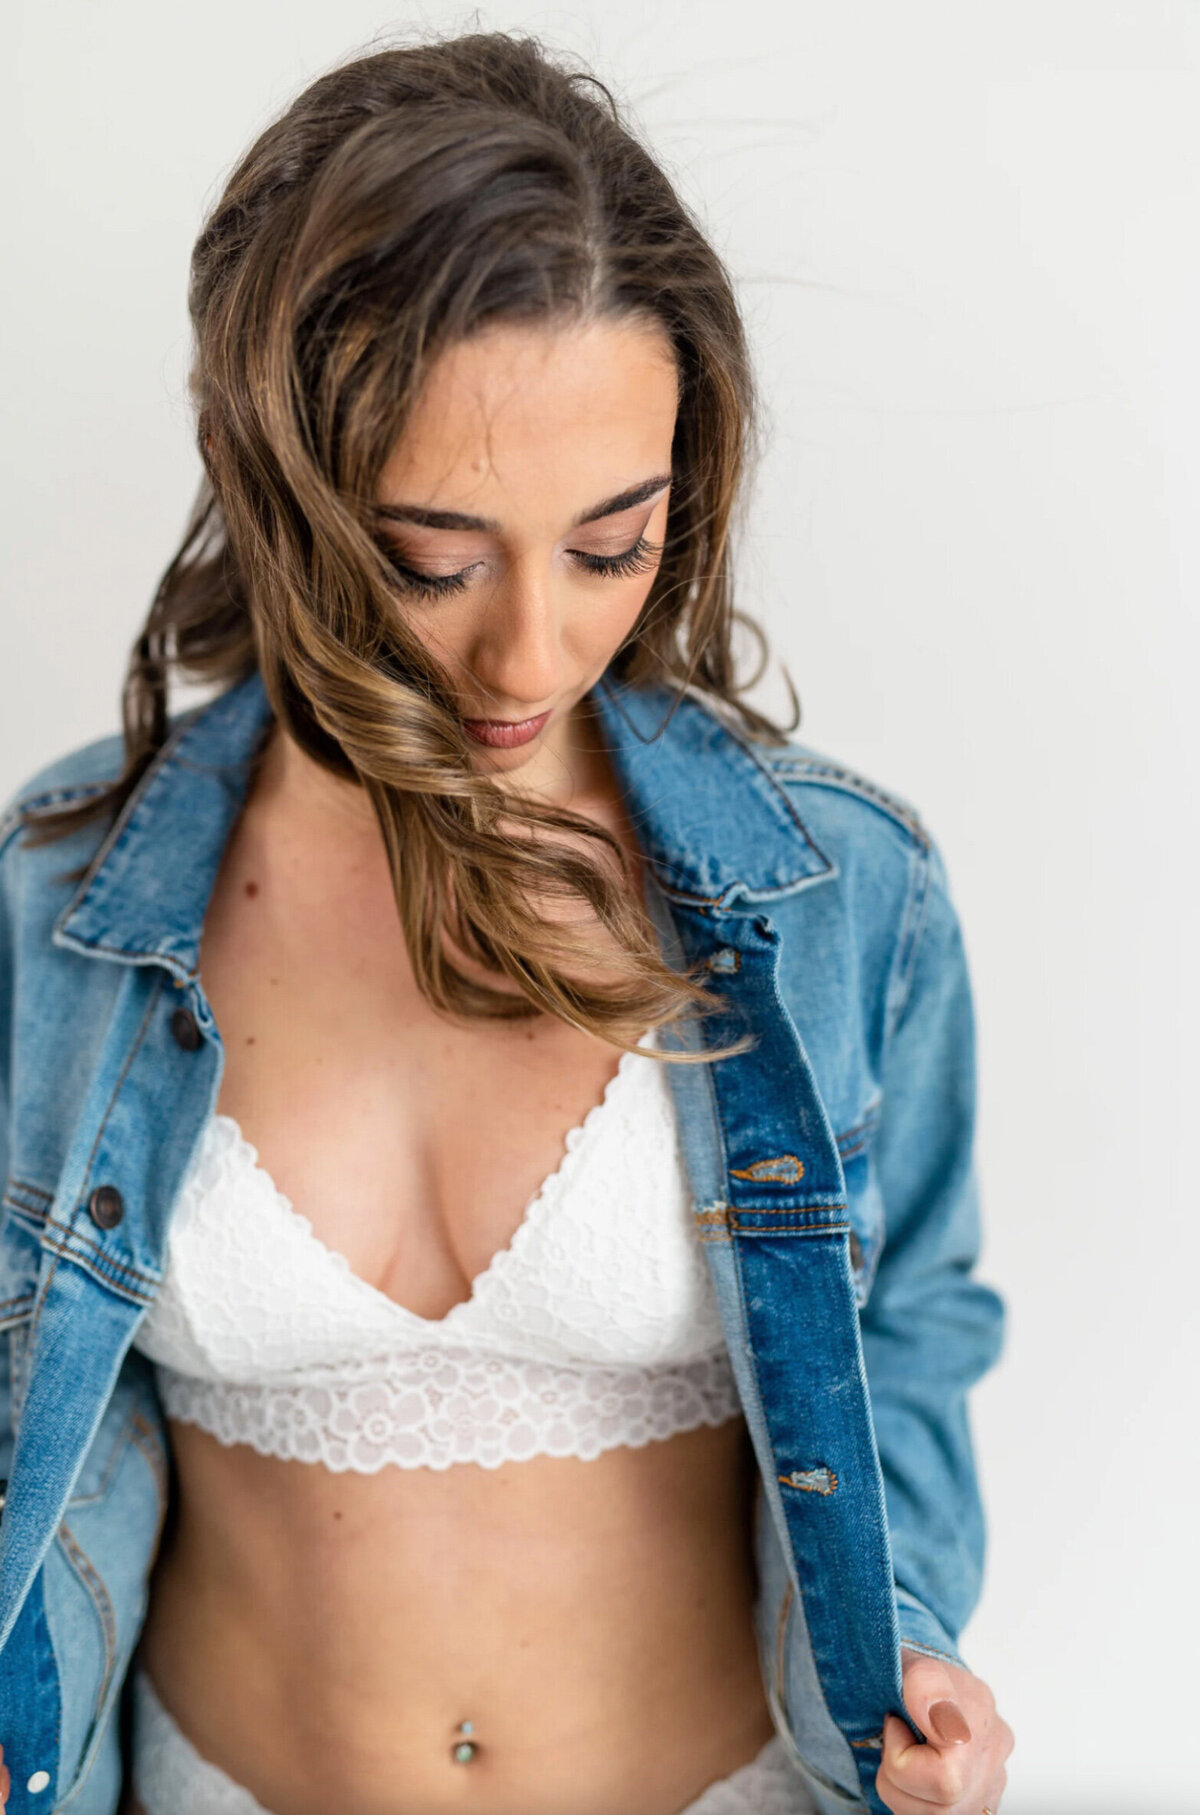 Brunette woman wearing white lingerie, and a jean jacket on a white background